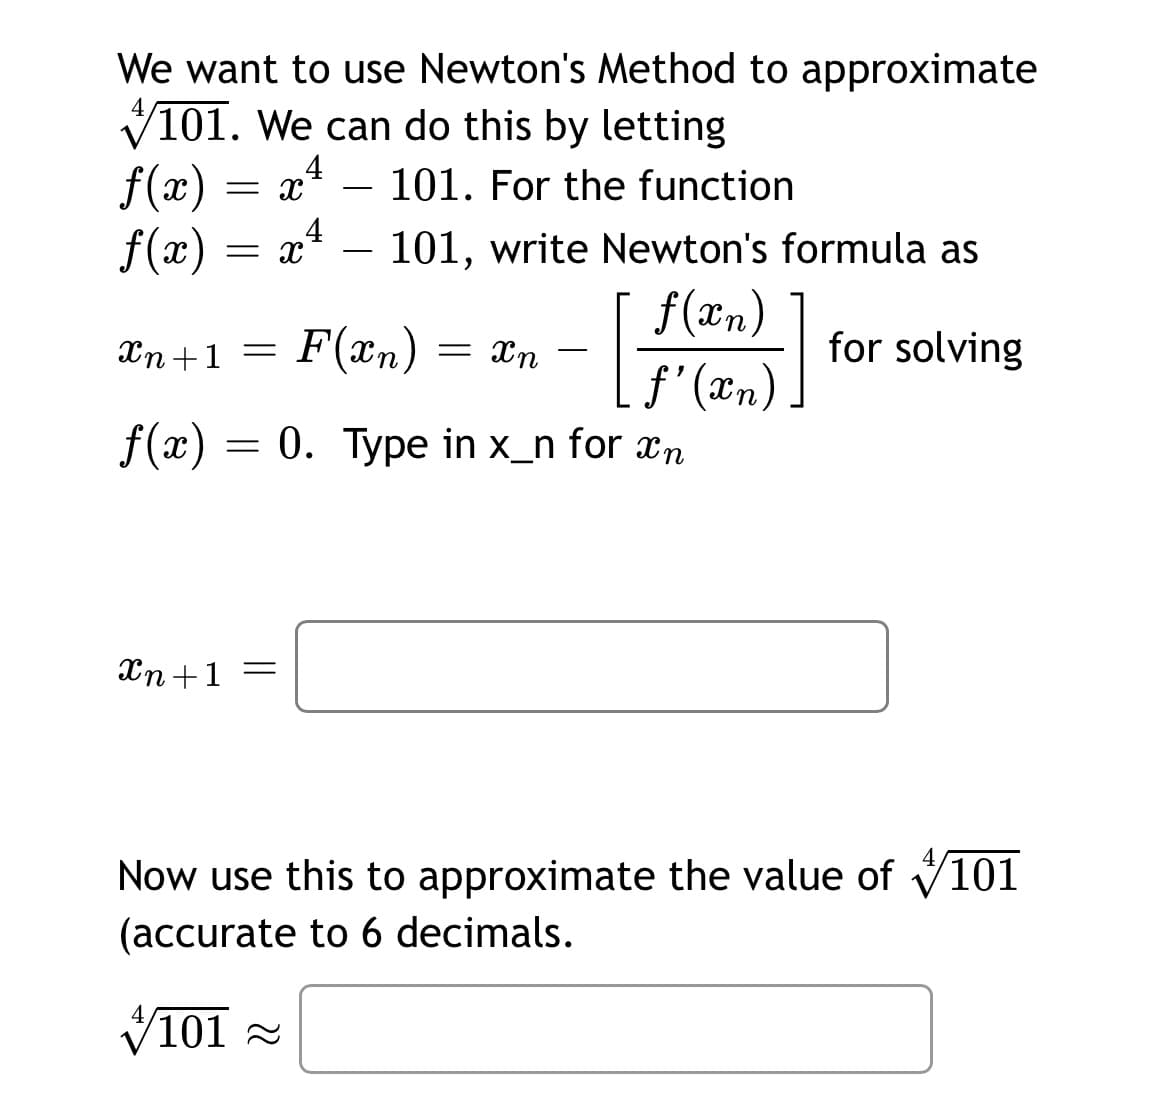 We want to use Newton's Method to approximate
V101. We can do this by letting
f(x) = x
f(x)
.4
101. For the function
4
= x
101, write Newton's formula as
-
f(xn)
f'(xn)
f(x) = 0. Type in x_n for xn
Xn +1 =
F(xn) = xn –
for solving
-
Xn+1 =
Now use this to approximate the value of V101
(accurate to 6 decimals.
V101 -
